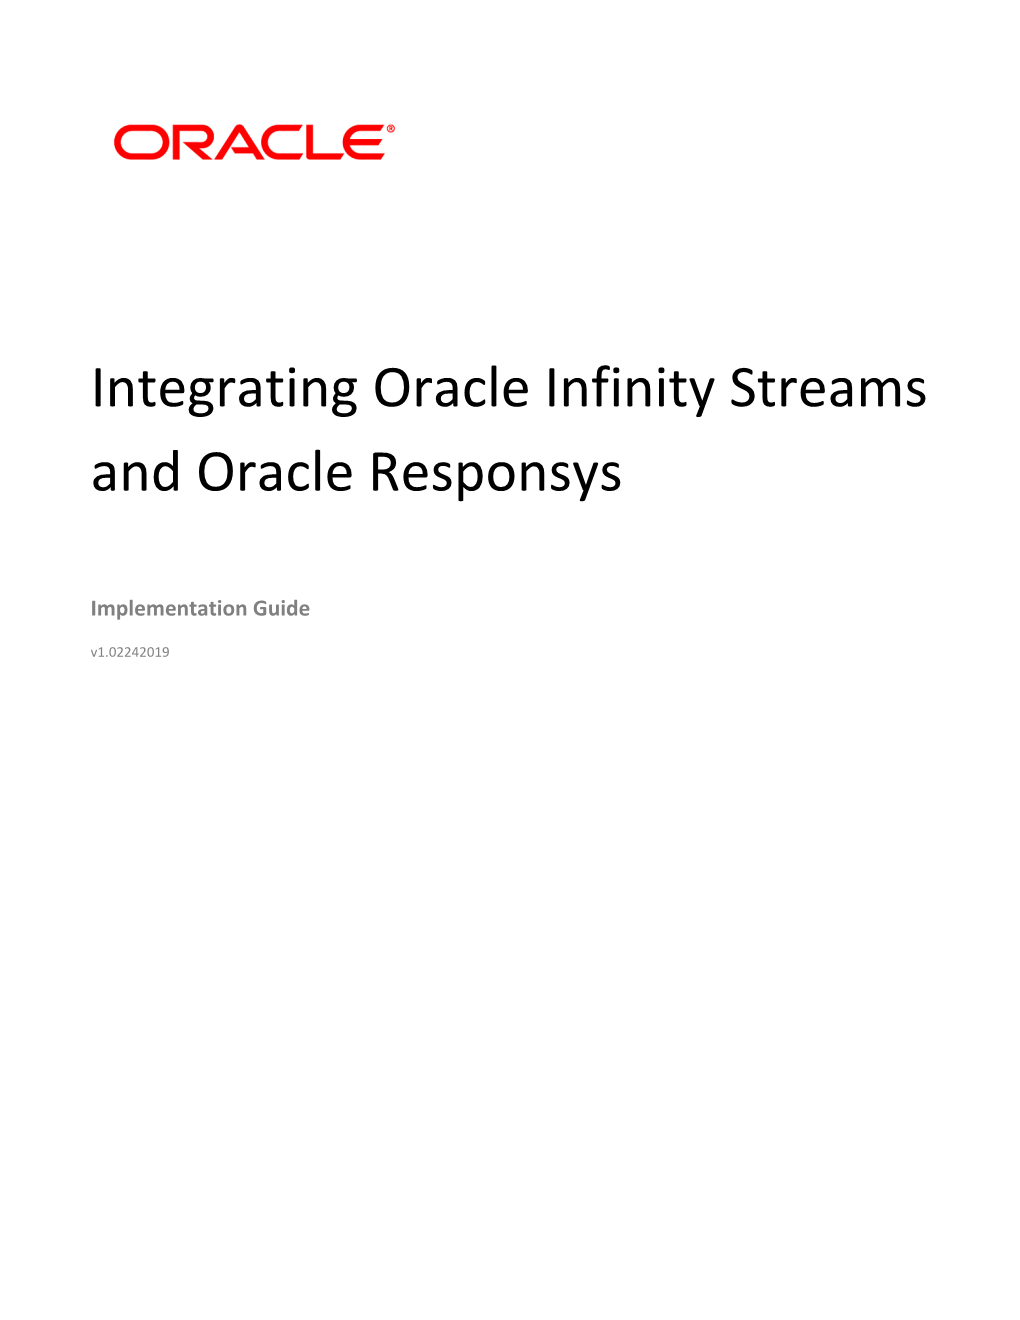 Integrating Oracle Infinity Streams and Oracle Responsys Implementation